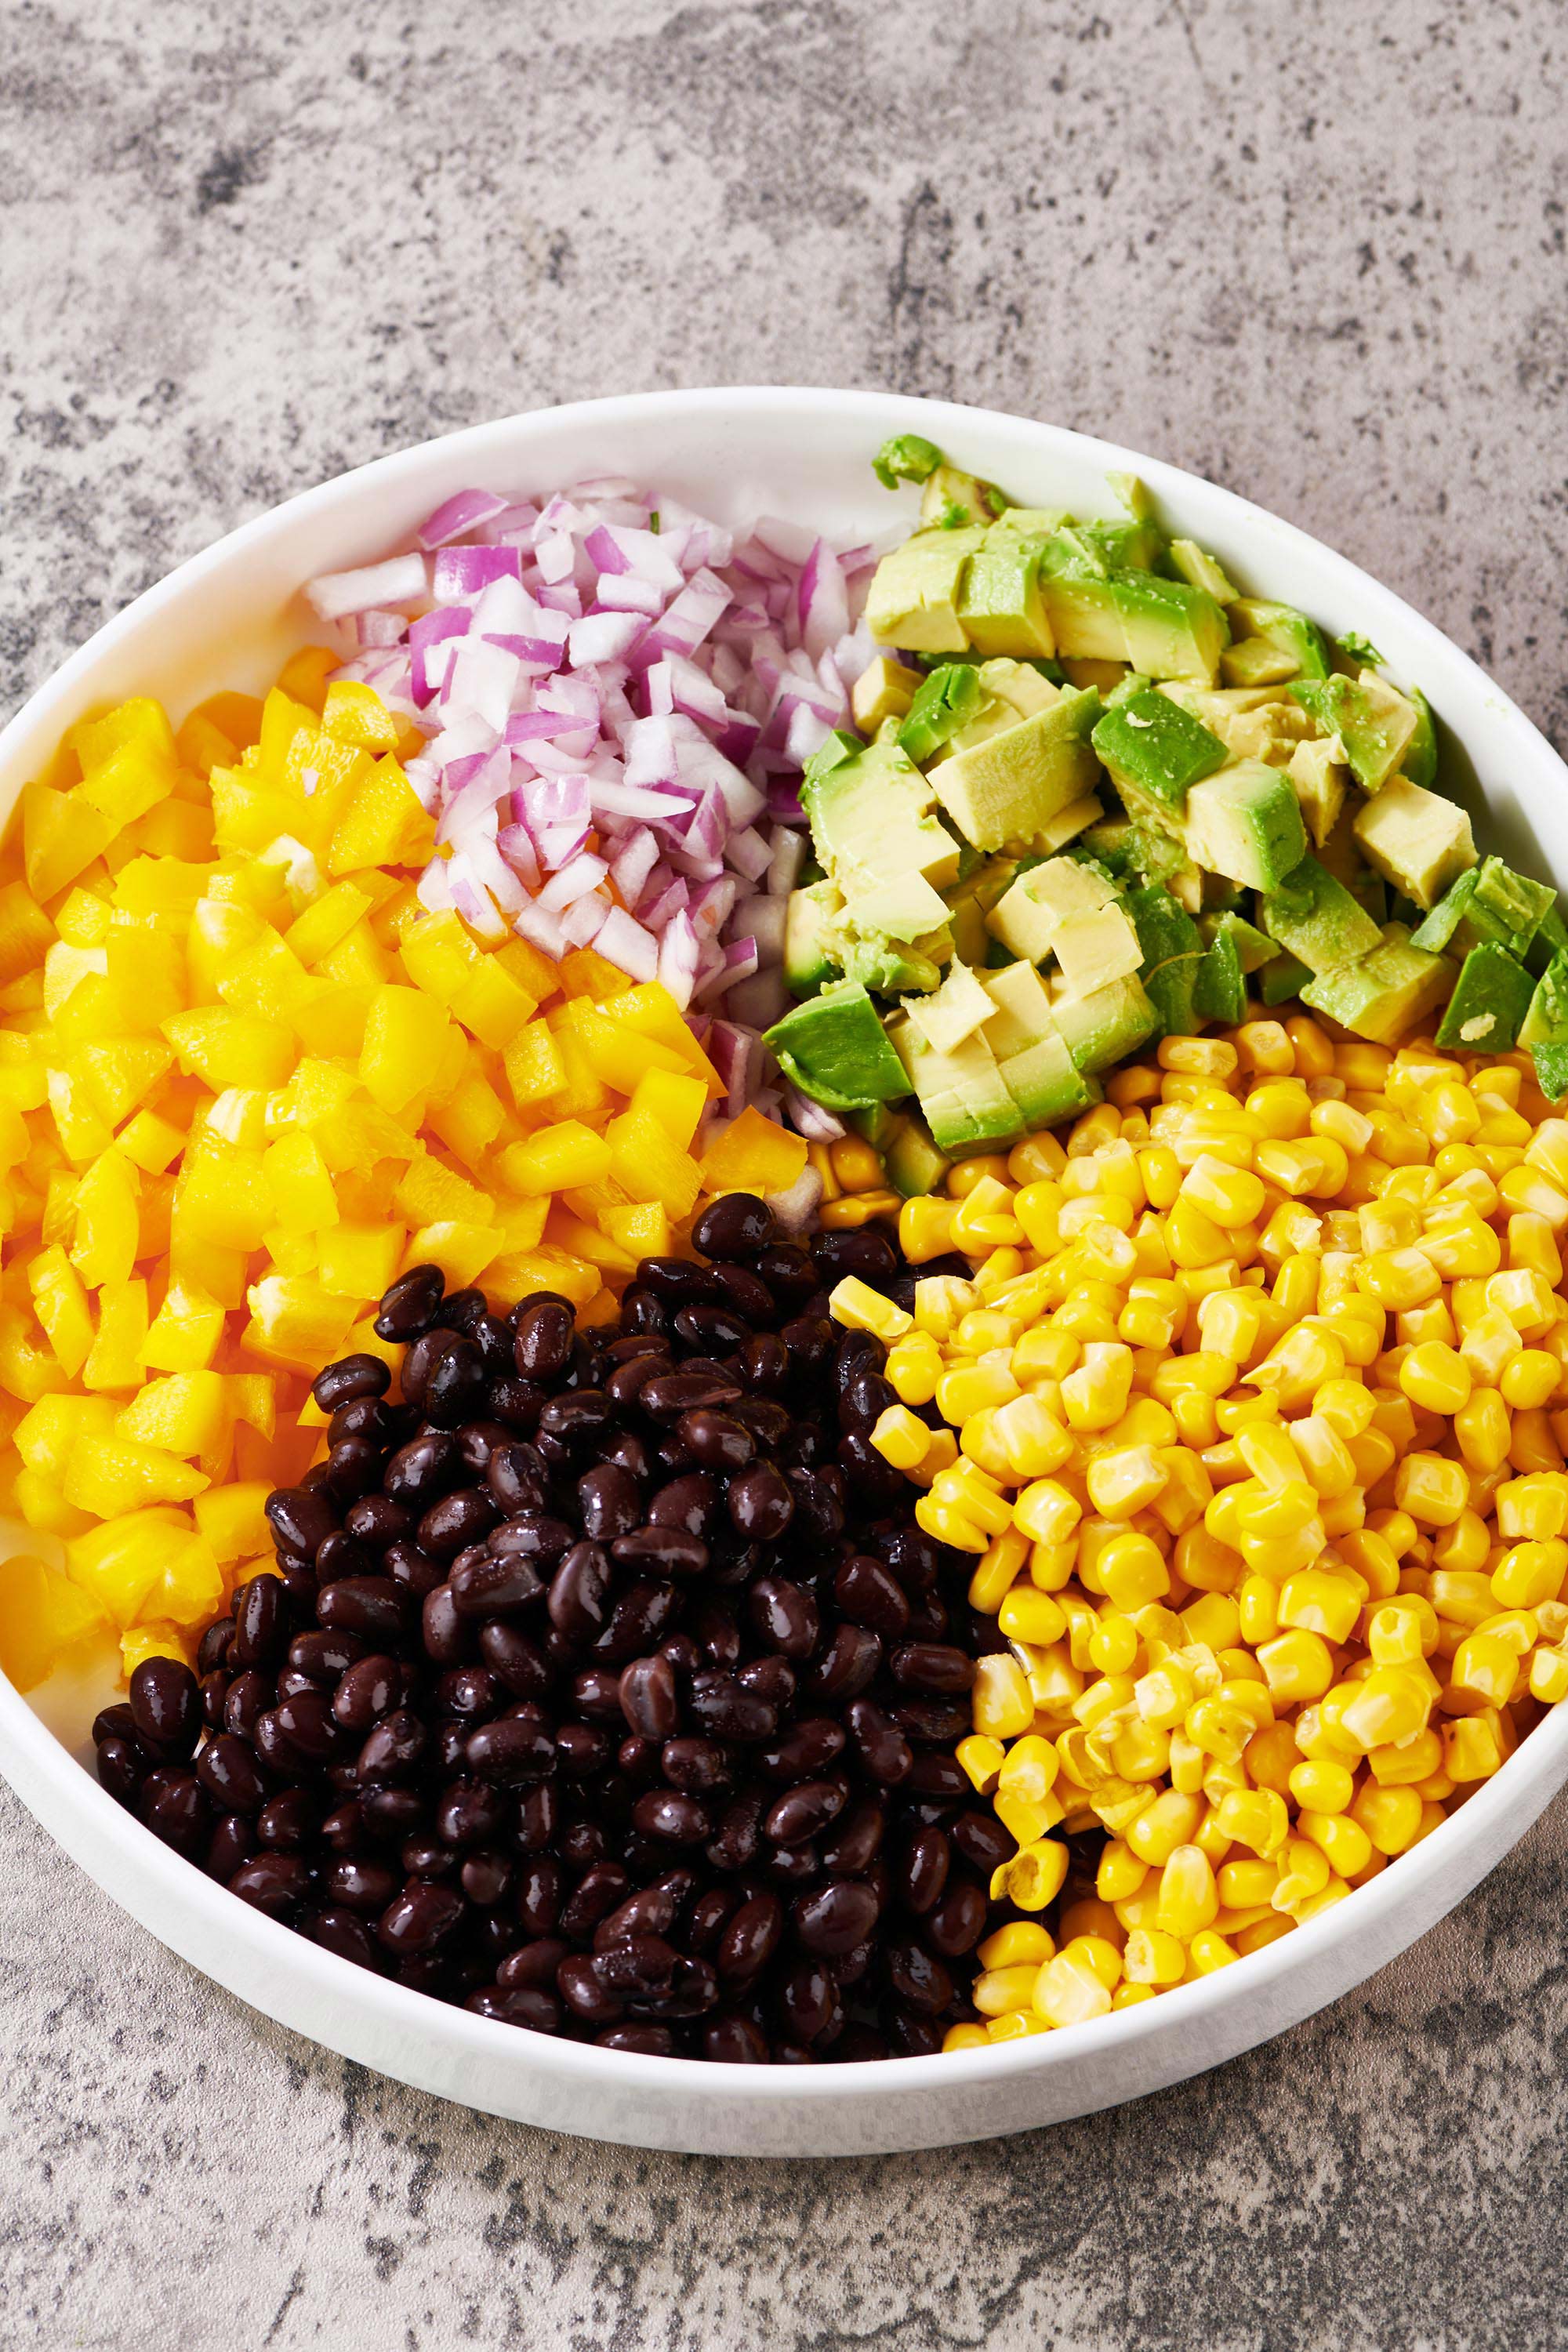 Ingredients for Cowboy Caviar, including corn and black beans, in a bowl.